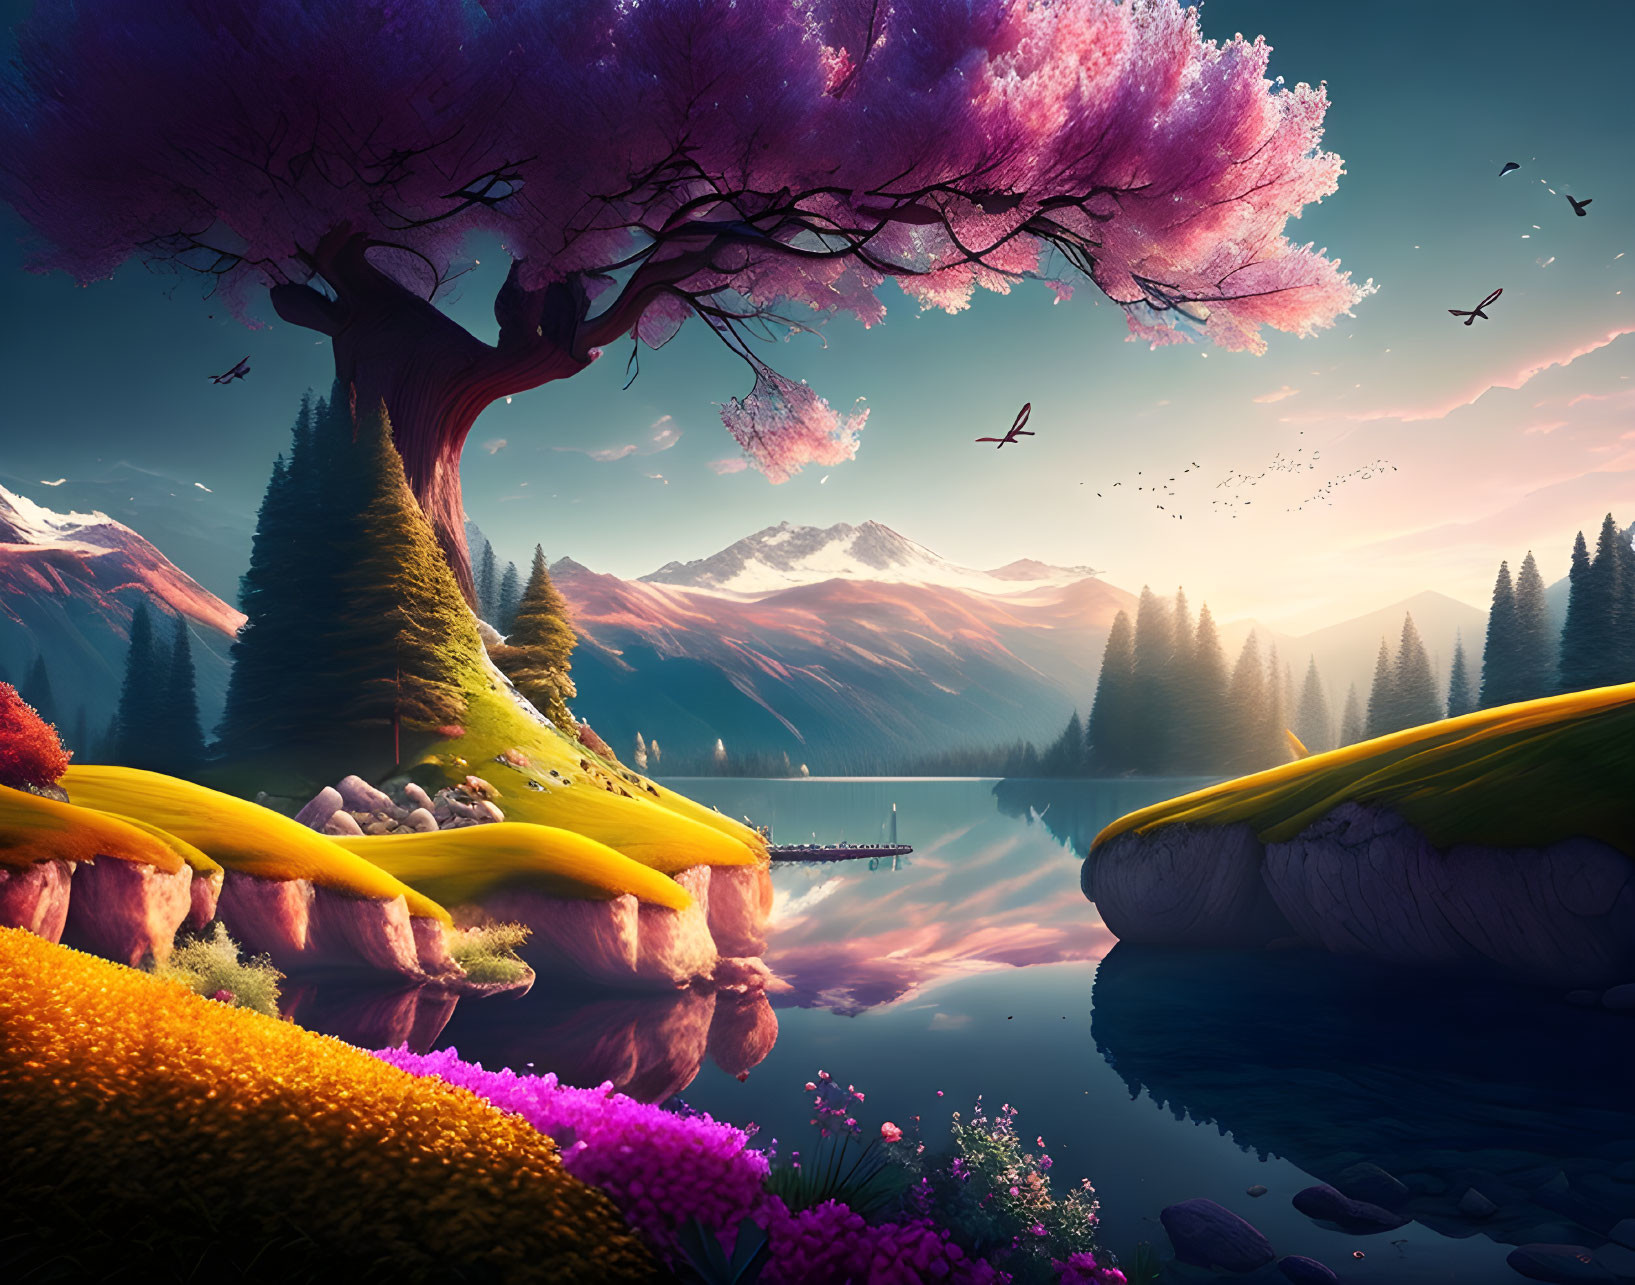 Colorful Cherry Blossom Tree in Surreal Landscape